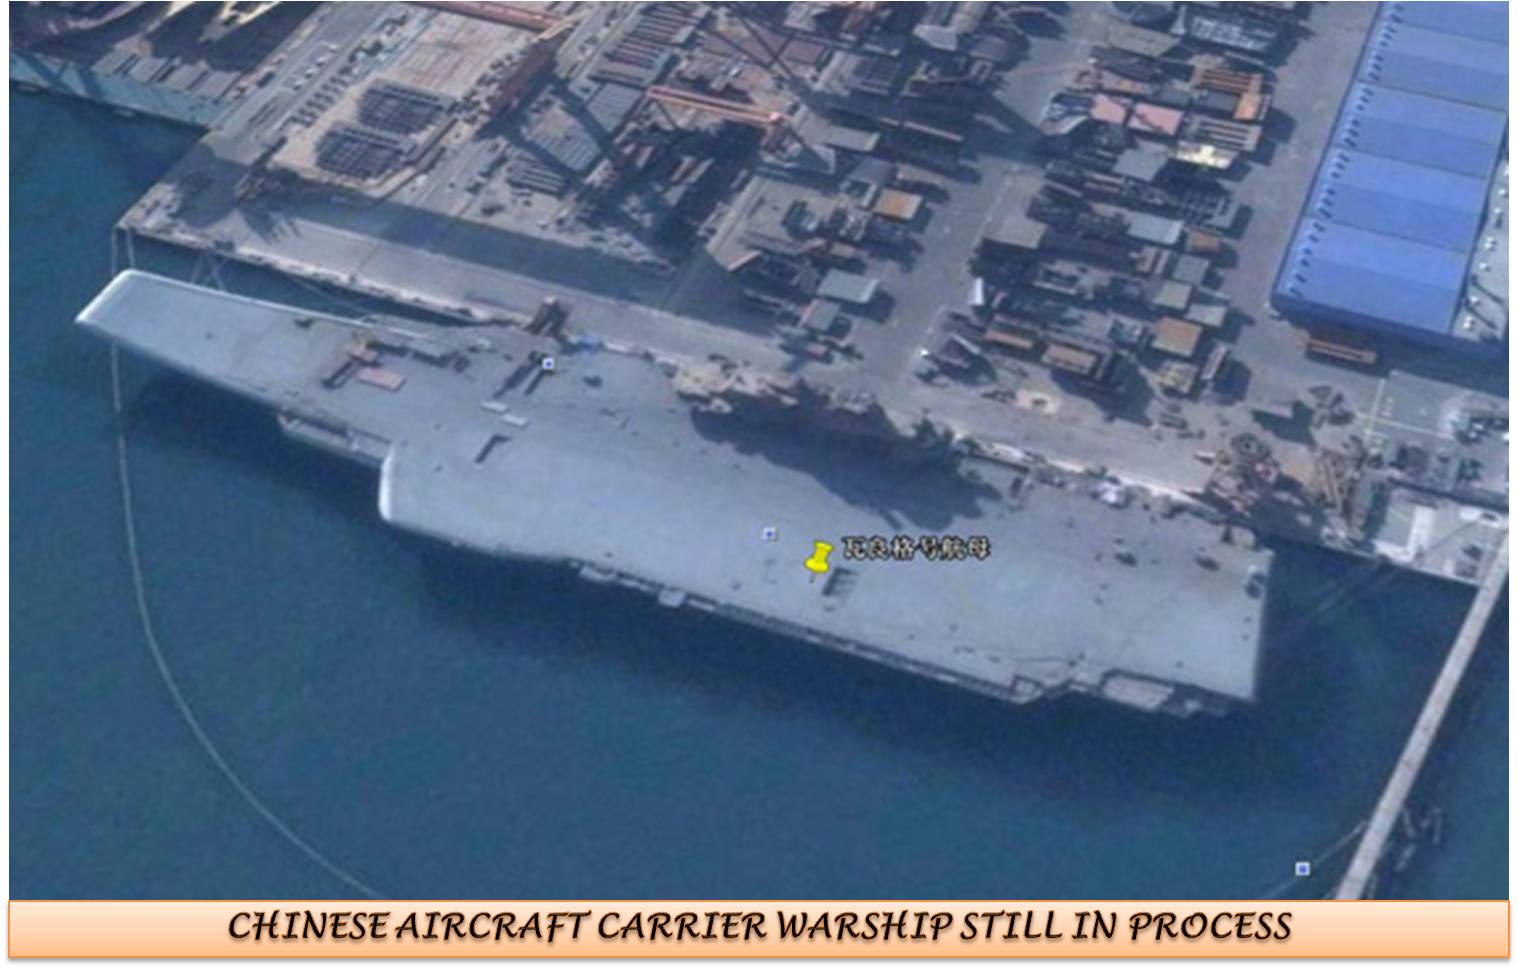  ... CONUNDRUM FOR CHINA » CHINESE AIRCRAFT CARRIER SHIP STILL IN PROCESS